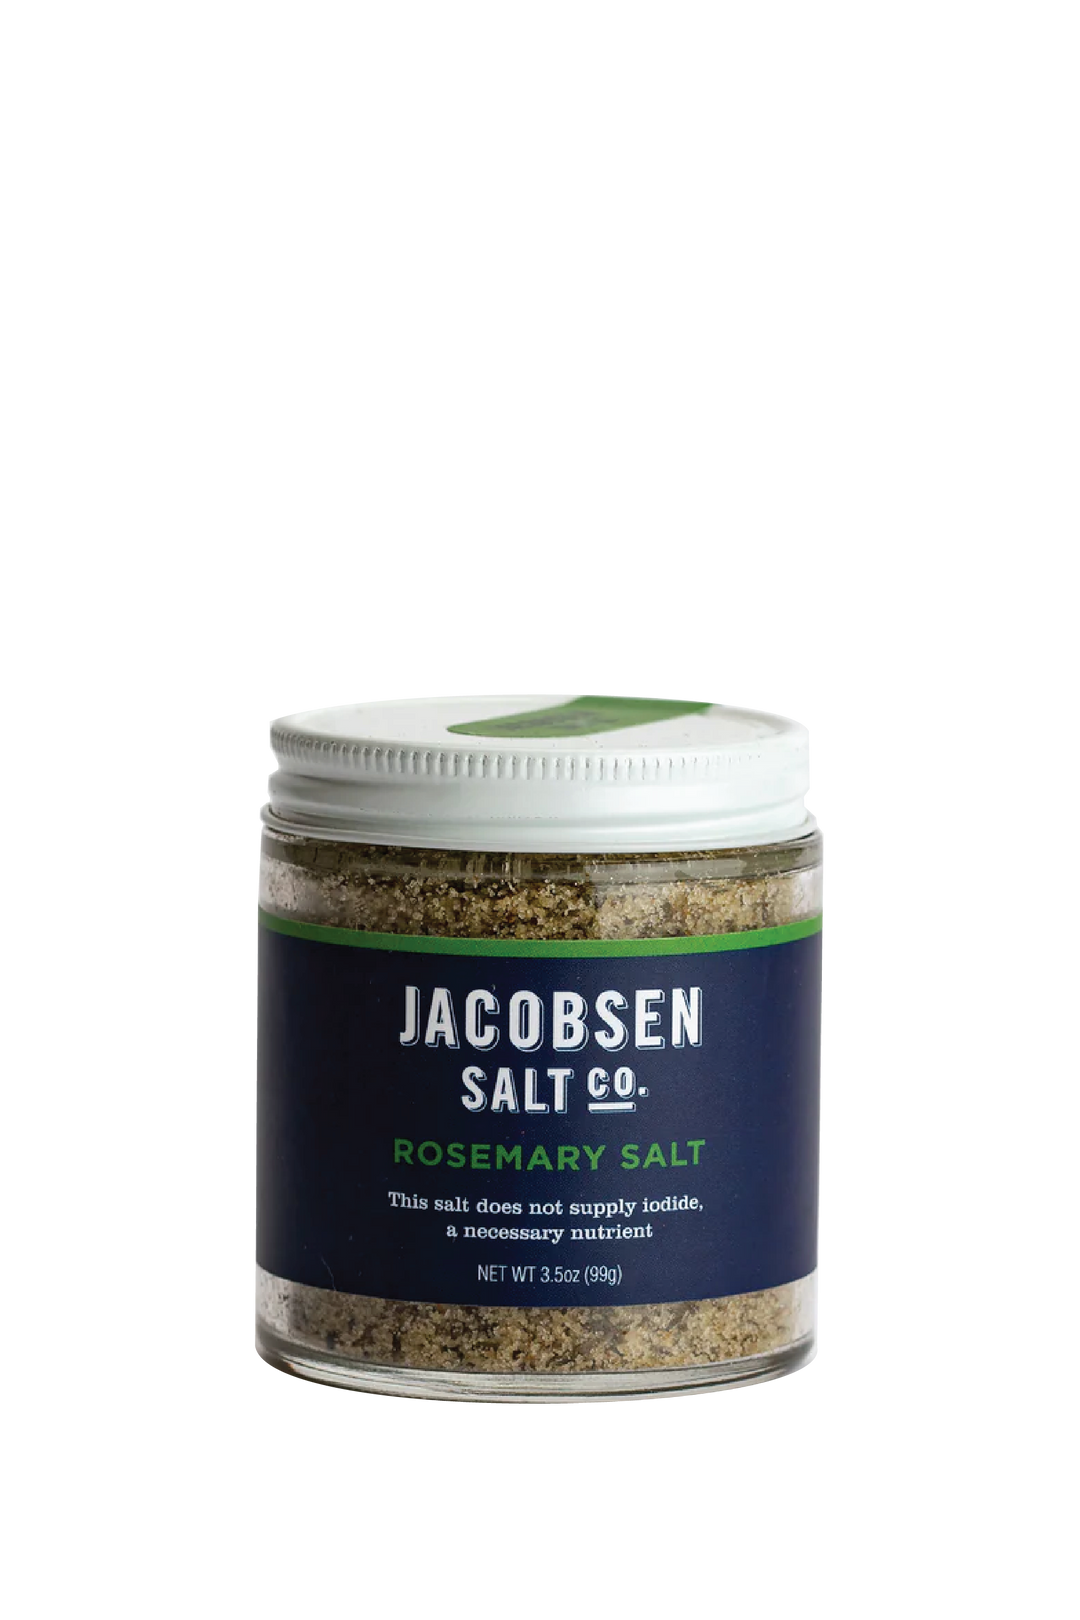 A Photo Of Rosemary Salt in a glass jar with a blue label. White Background.